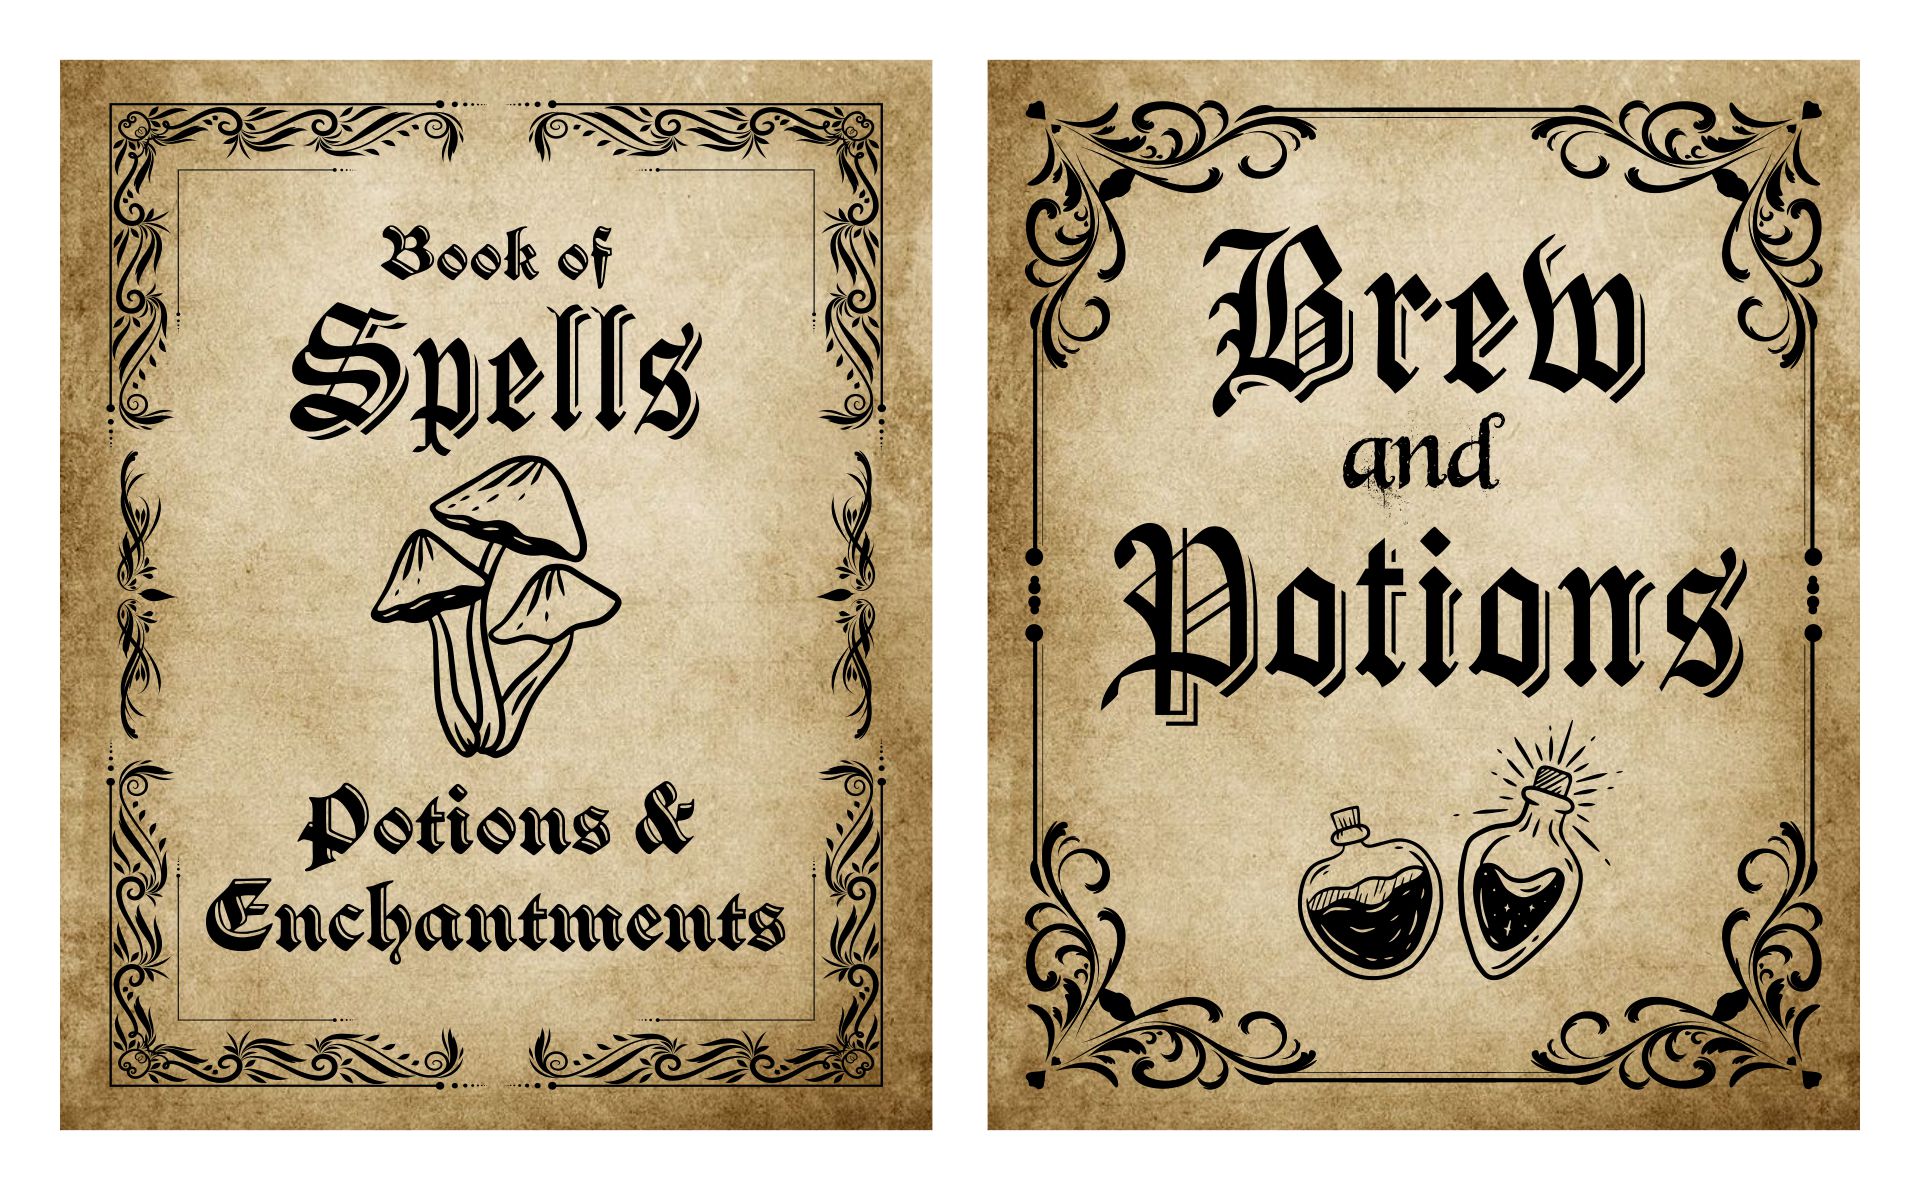 Printable Halloween Spell & Potions Book Covers